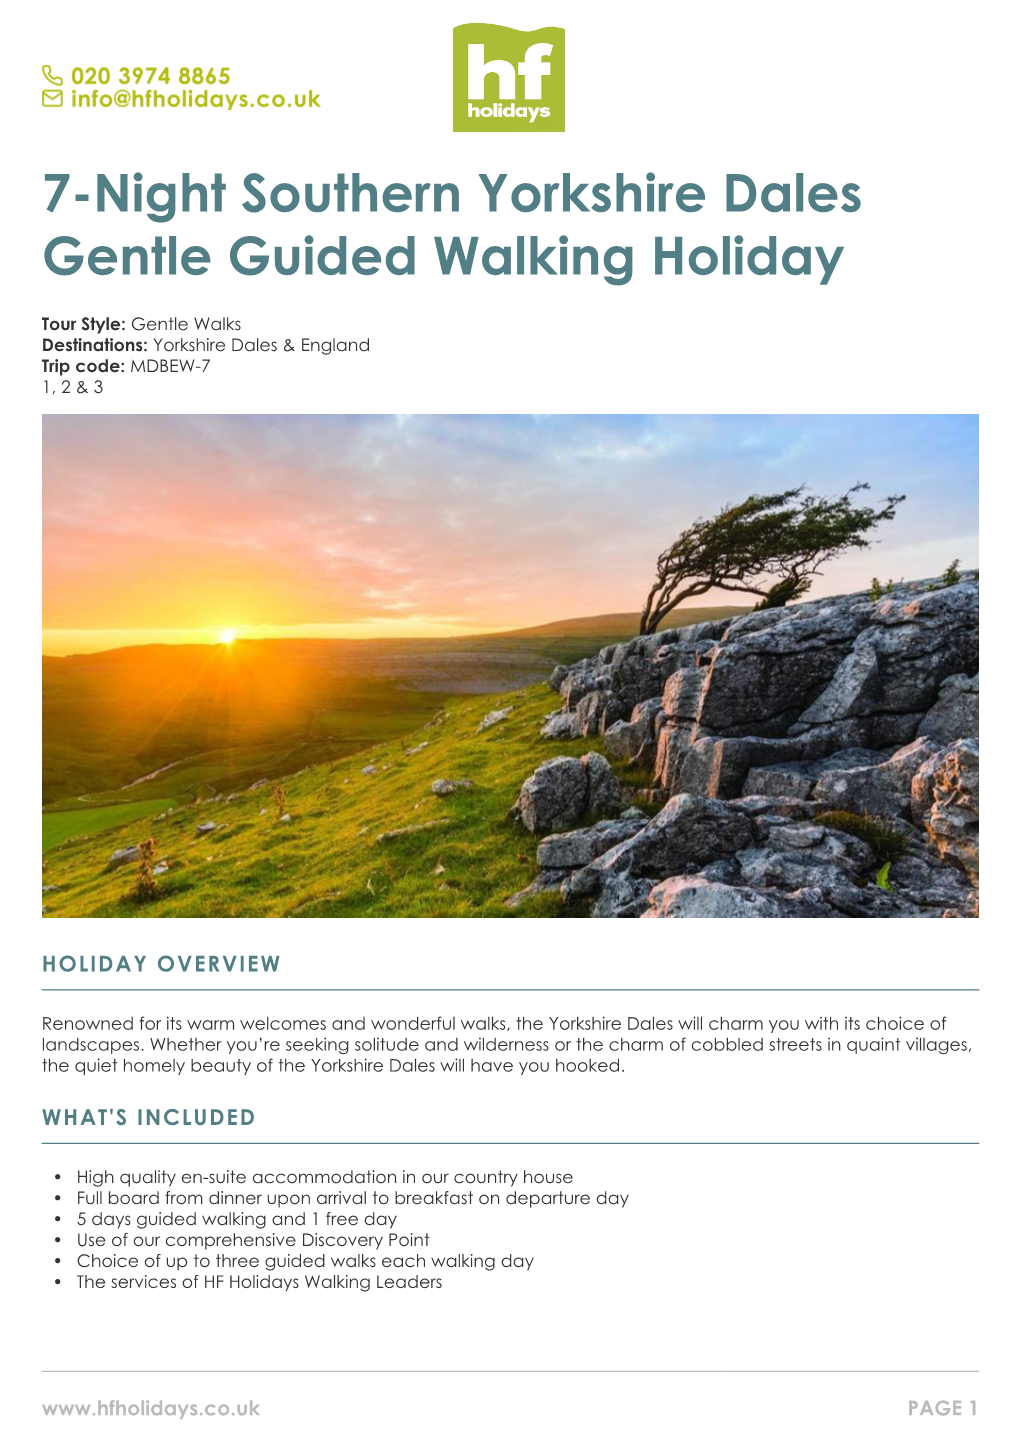 7-Night Southern Yorkshire Dales Gentle Guided Walking Holiday